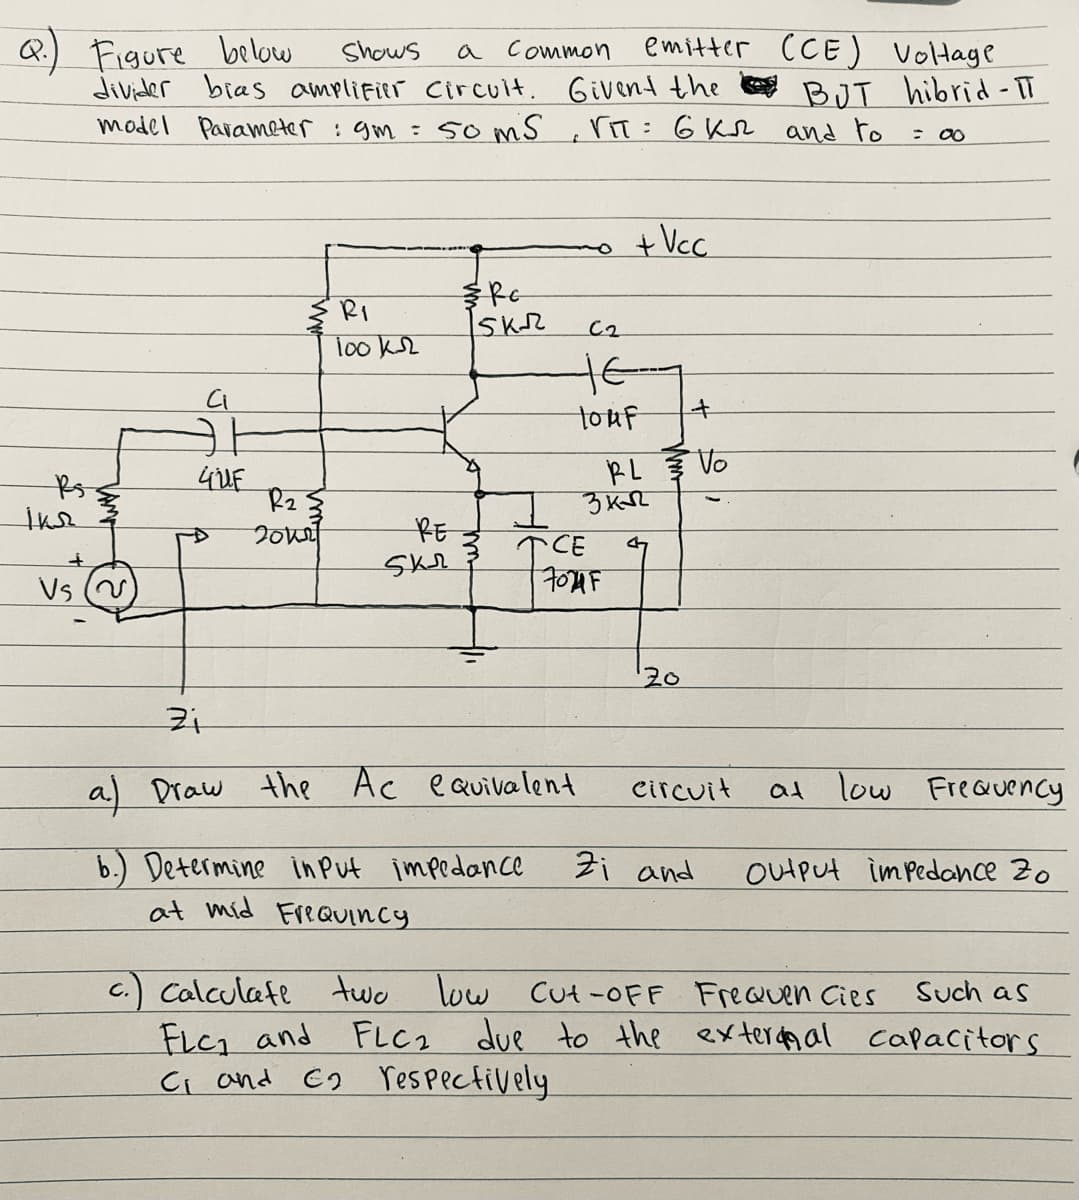 Q.) Figure below
divider bras amplifier Circuit. Givent the
model Parameter : gm = 5o mS
emitter (CE) Voltage
BJT hibrid- TT
Shows
a Common
riT: 6 Kr and to
%3D
: 00
+Vc.
RI
C2
Tooks
touf
RL Vo
ihe
200
RE
TCE
Vs
20
a Draw the Ac eQuivalent
at low
Freauency
Circuit
Zi and
b.) Determine inPut impedance
at mid FreaUincy
OutPut imPedance Z0
c.) Calculafe two low Cut -oFF FreQuen Cies
FLC1 and FLC2
Ci and E2 respectively
Such as
due to the exterda al
capacitors
